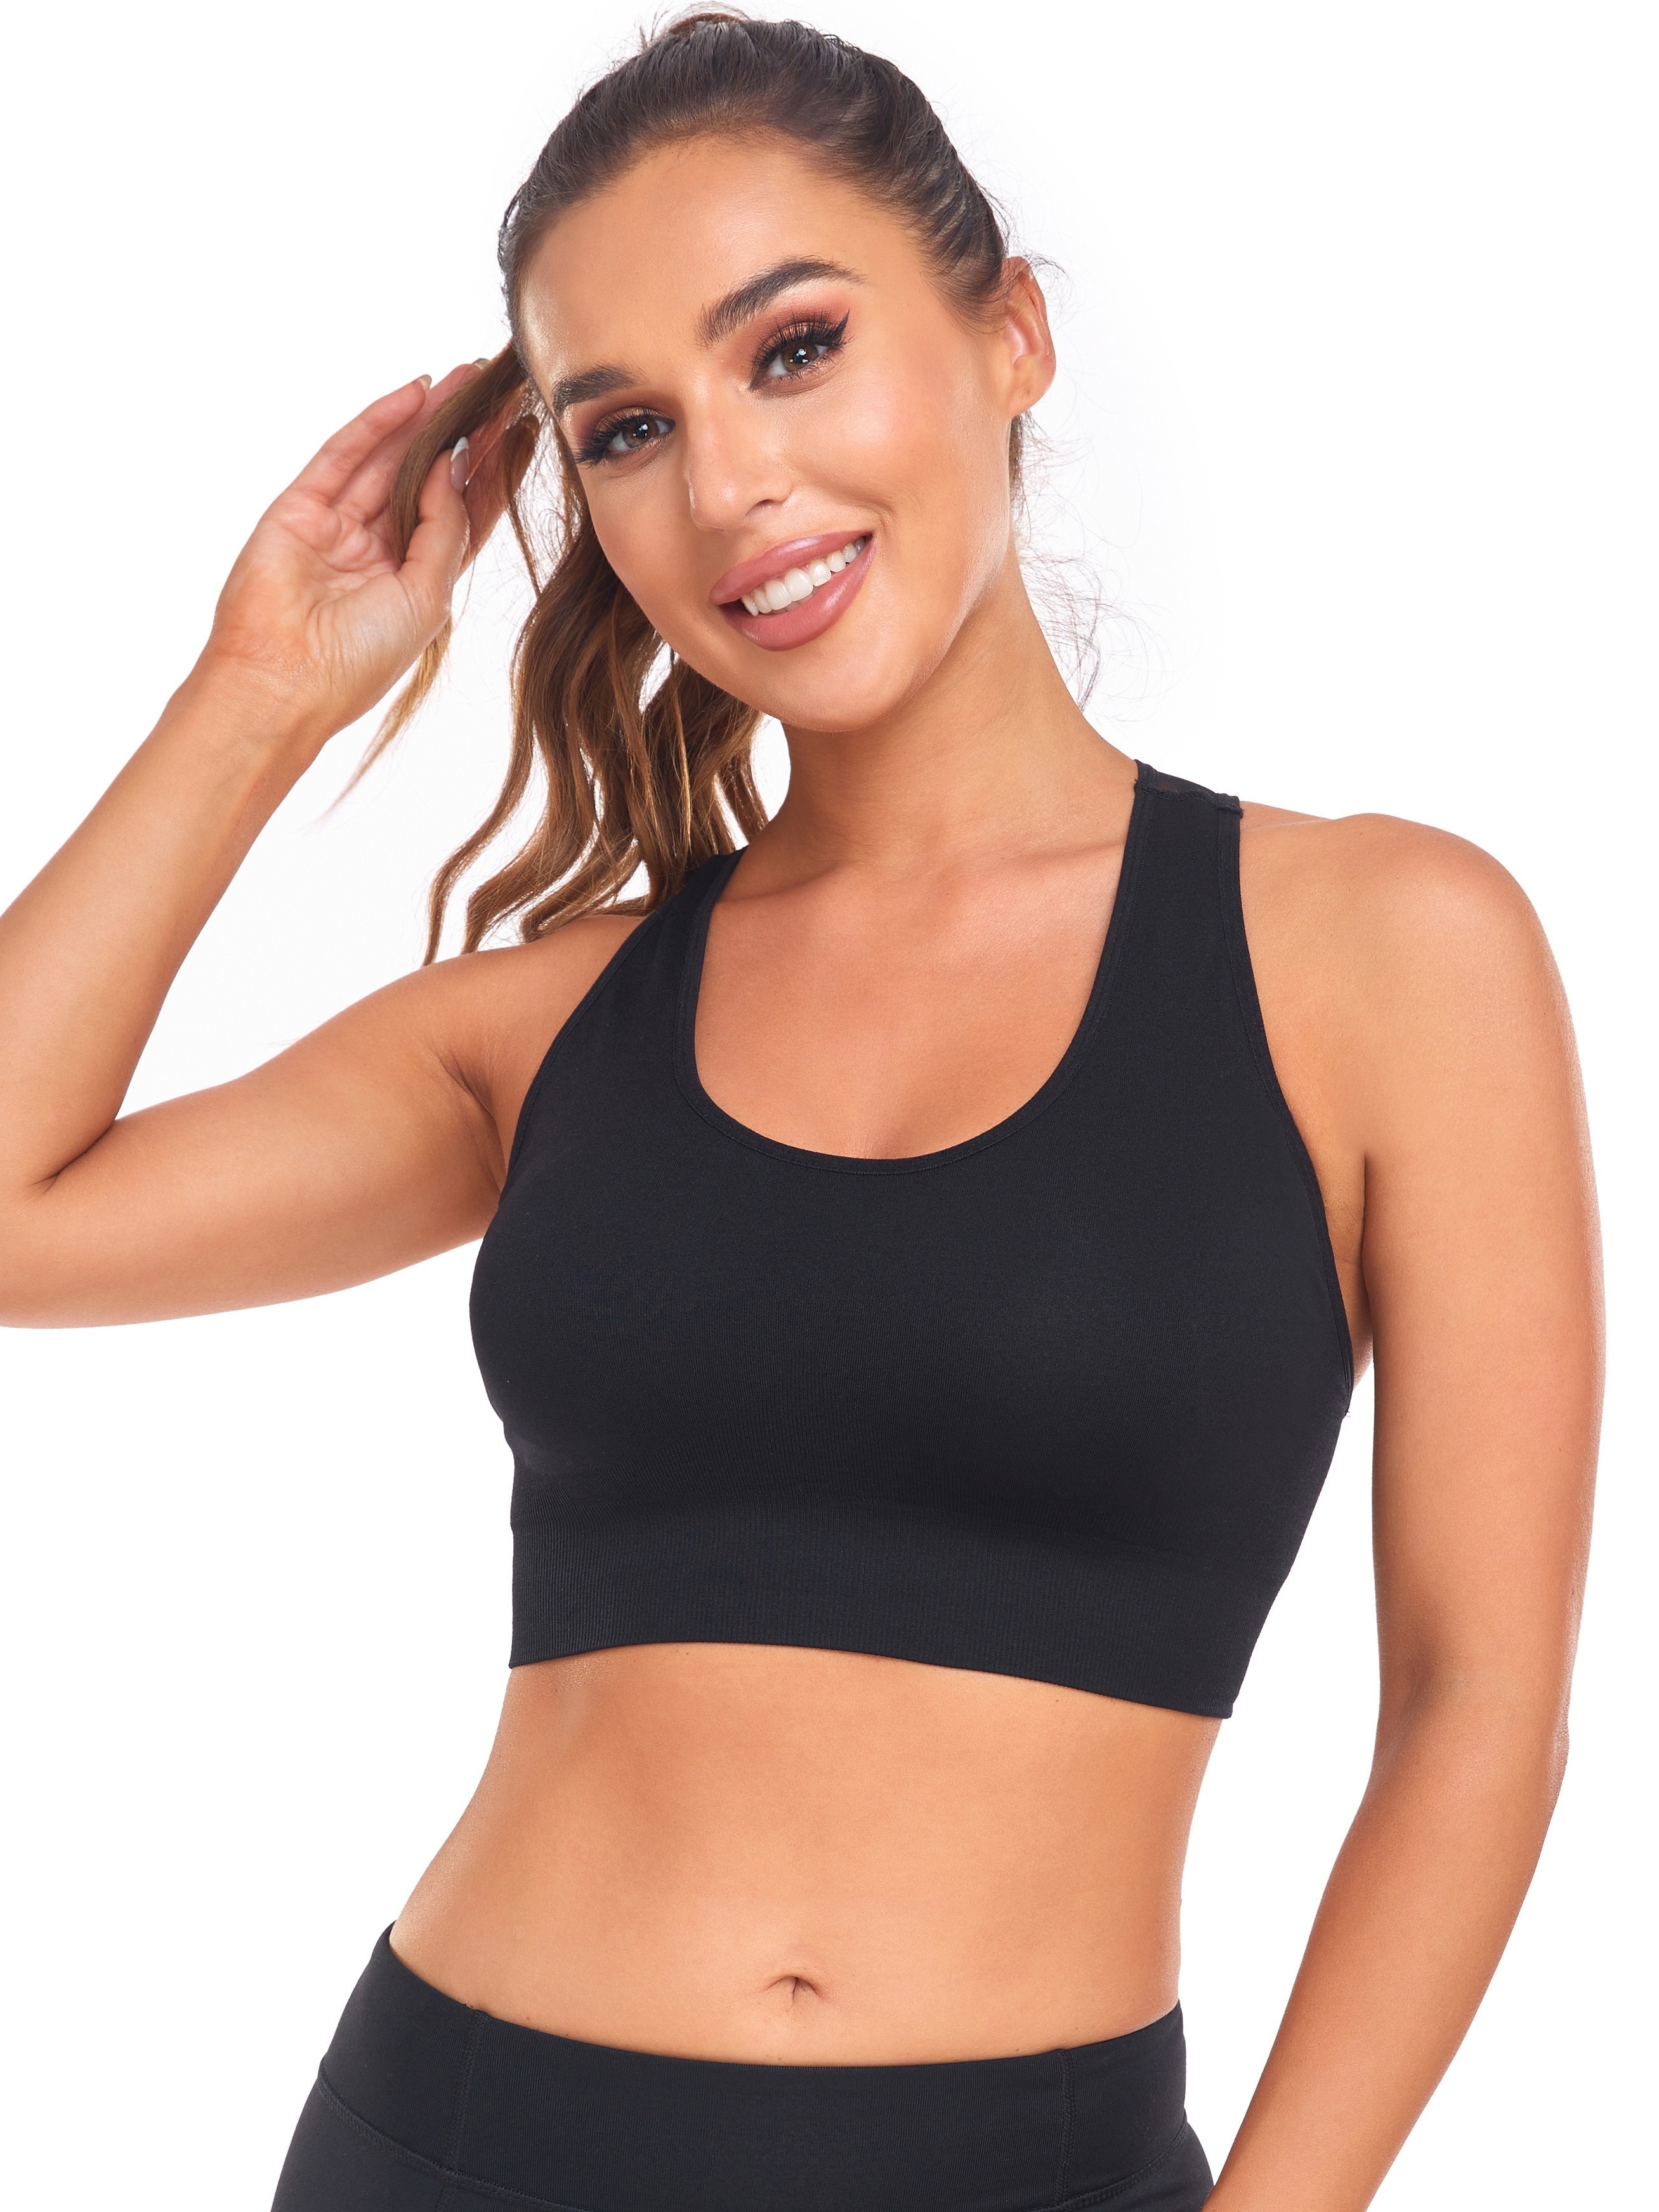 Women's Sexy Tops Breathable Fitness Yoga Sports Bra For Women